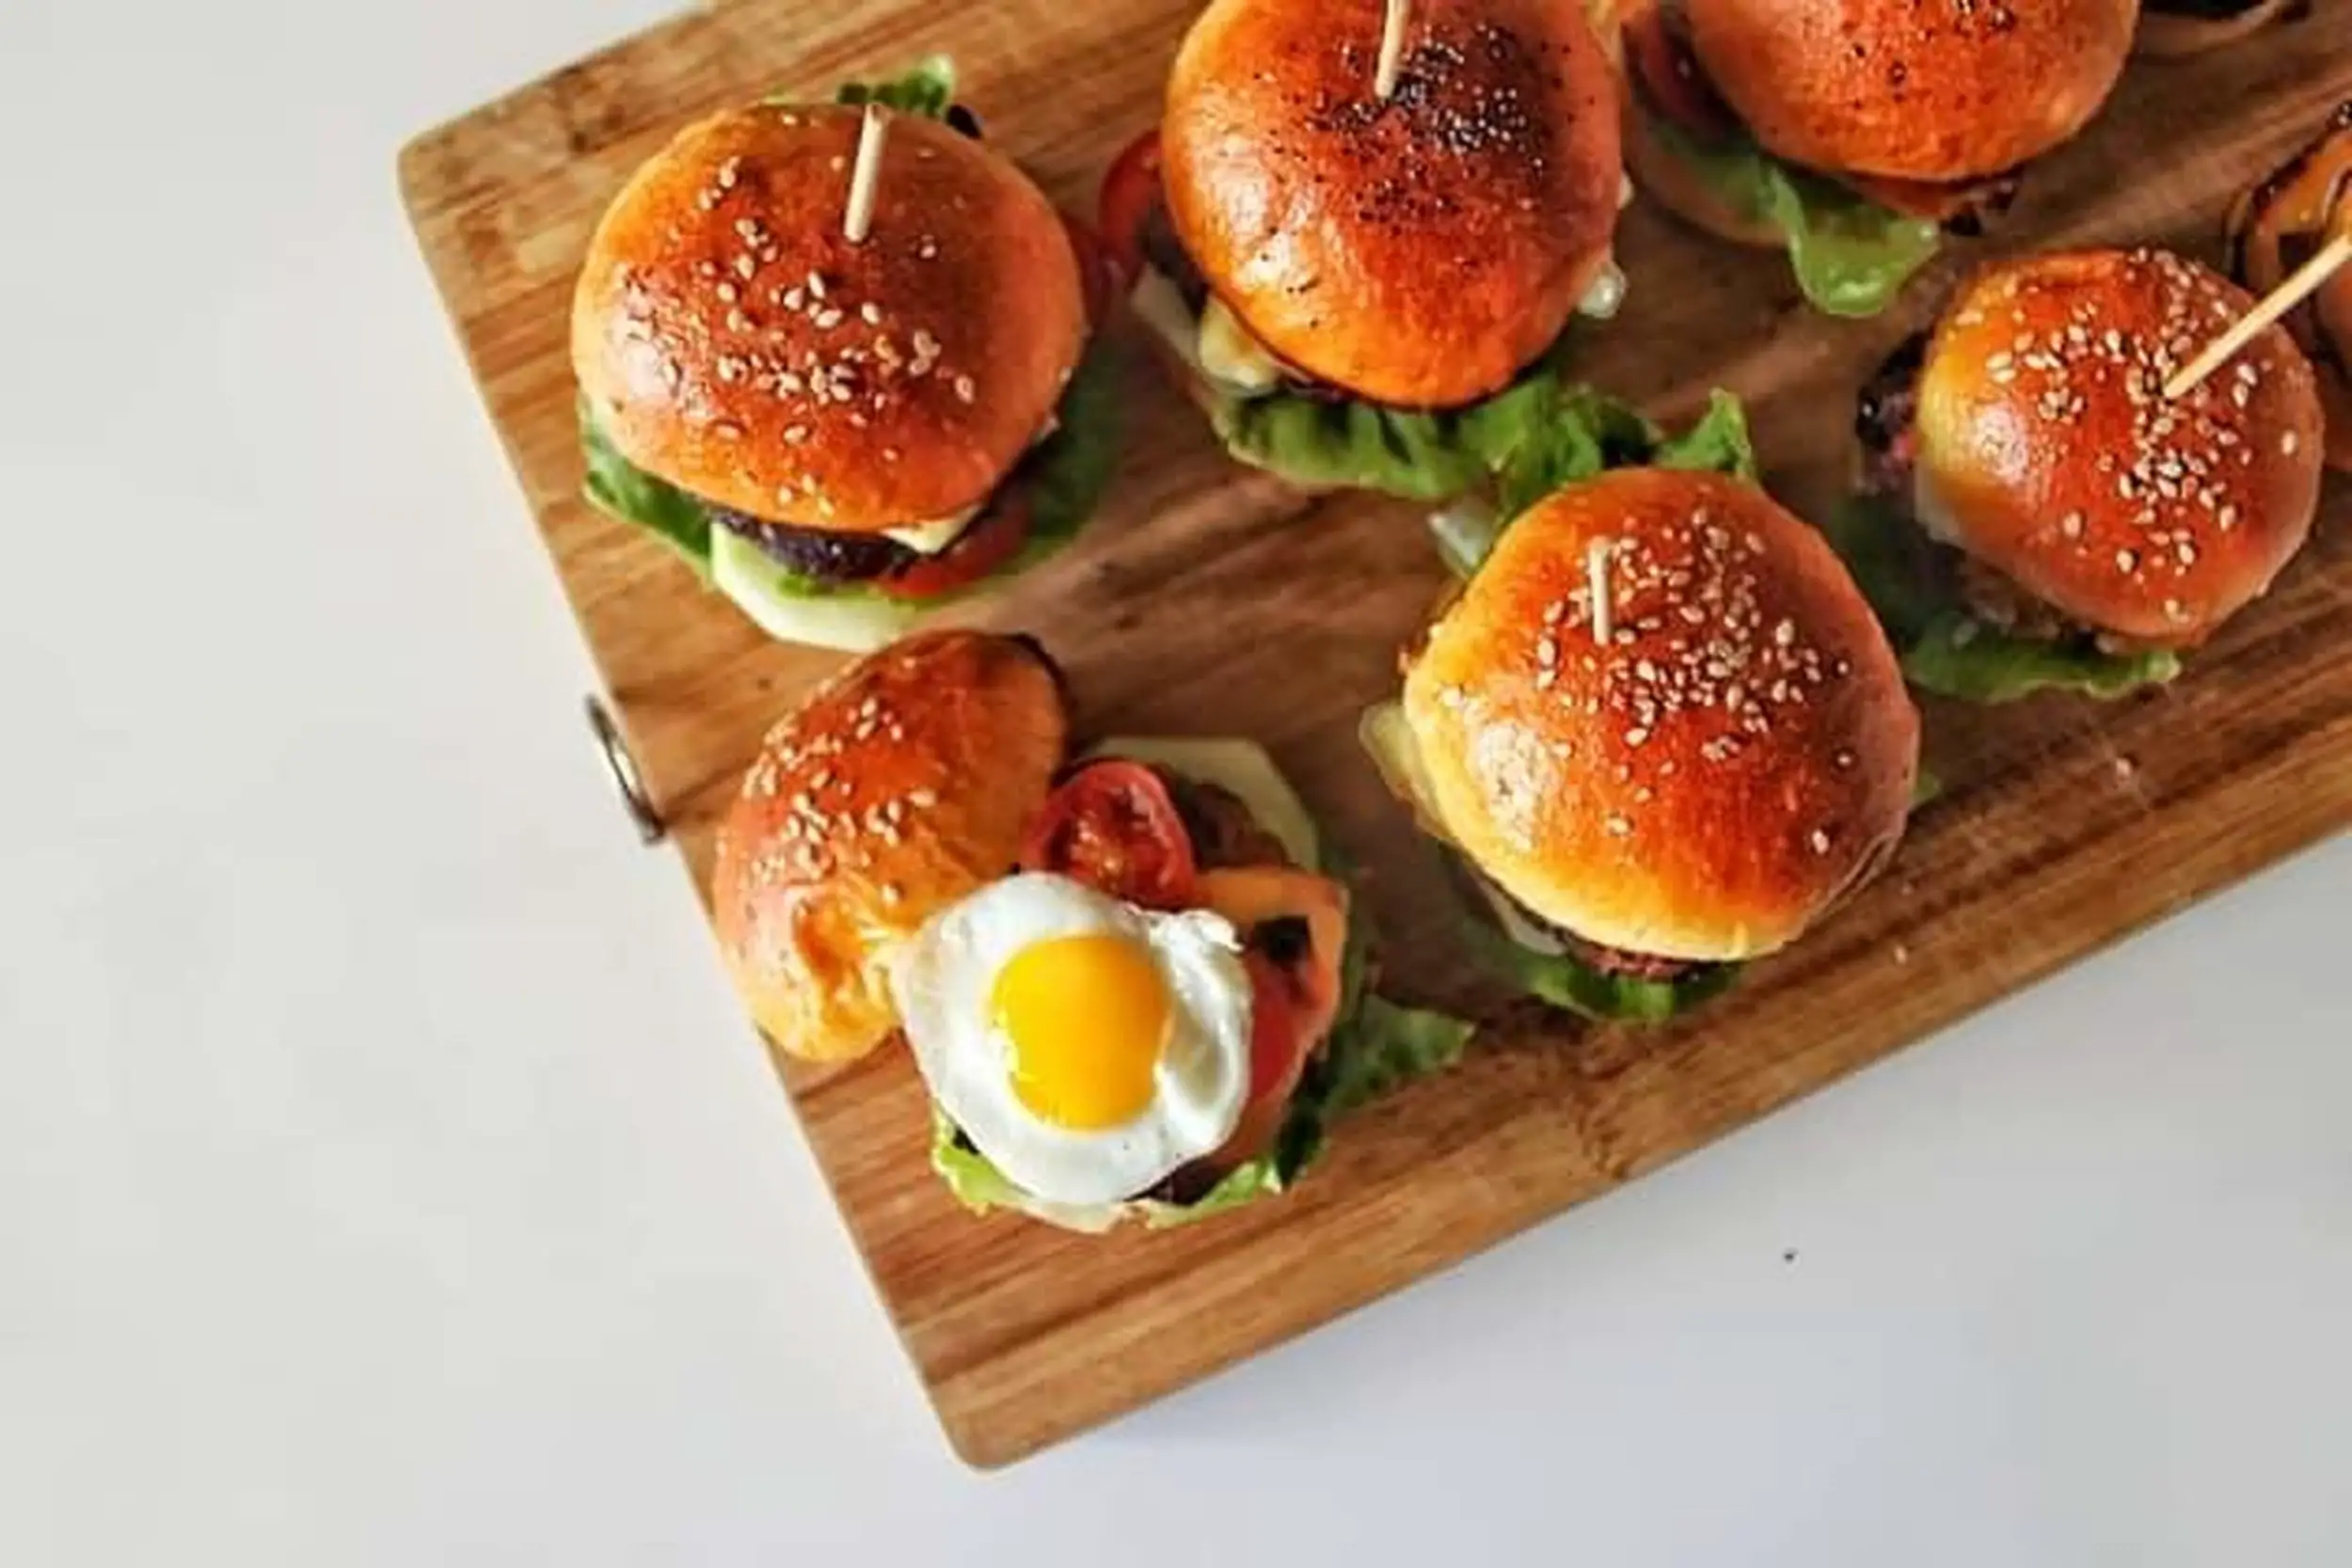 what to pair with red wine tasting - sliders